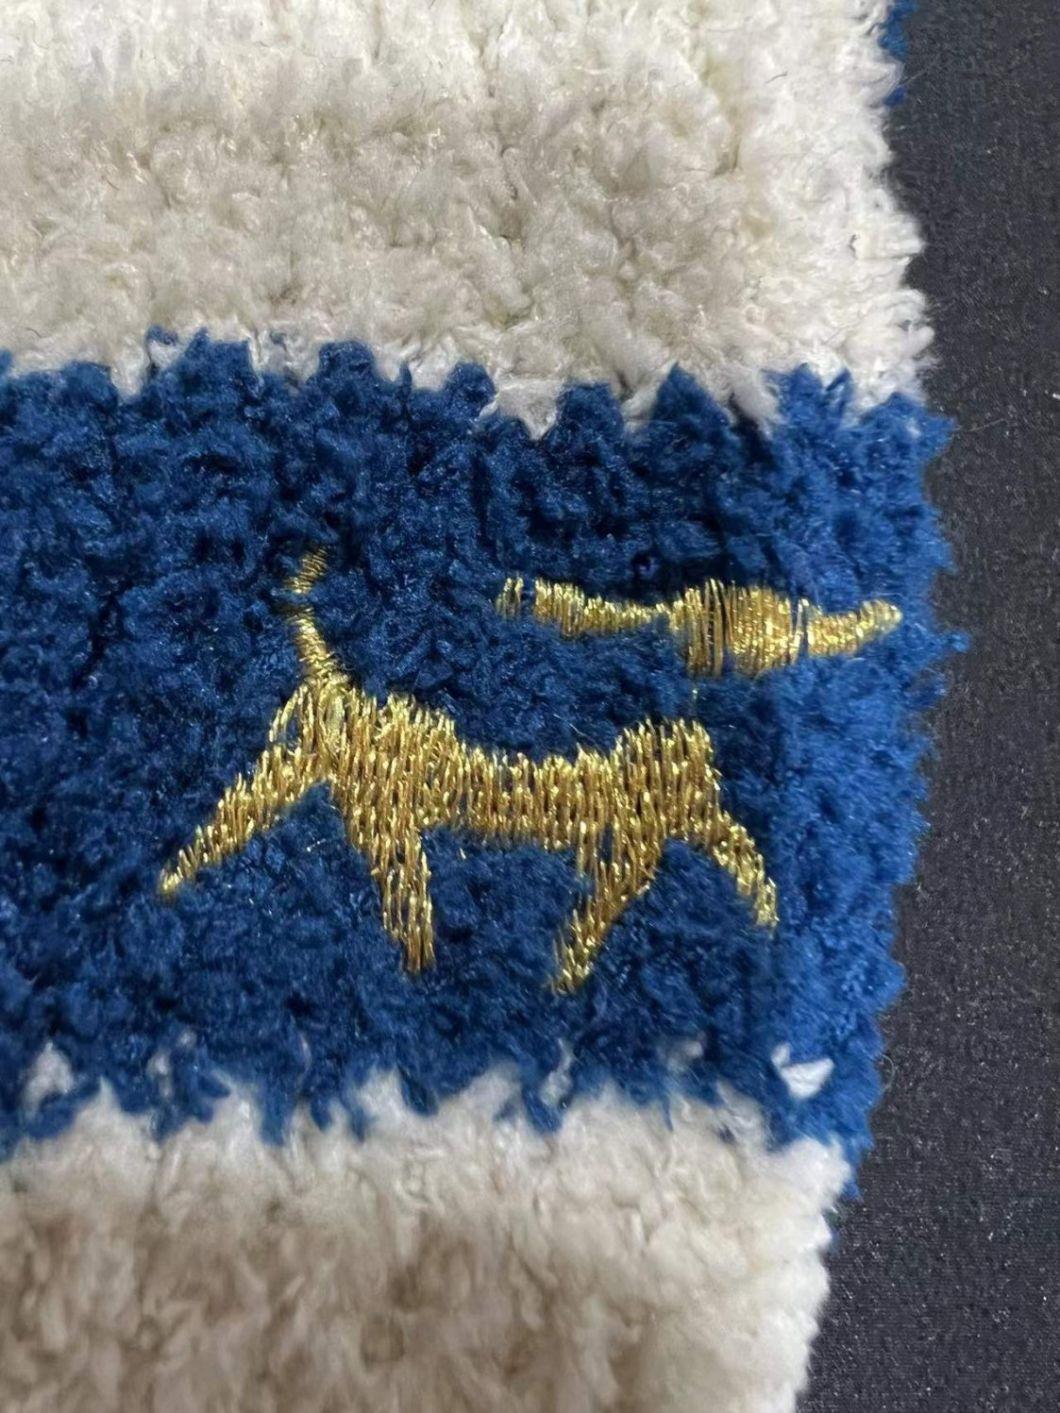 Blue and White Strop Dog Sweater Pet Sweater Pet Clothing Pet Products